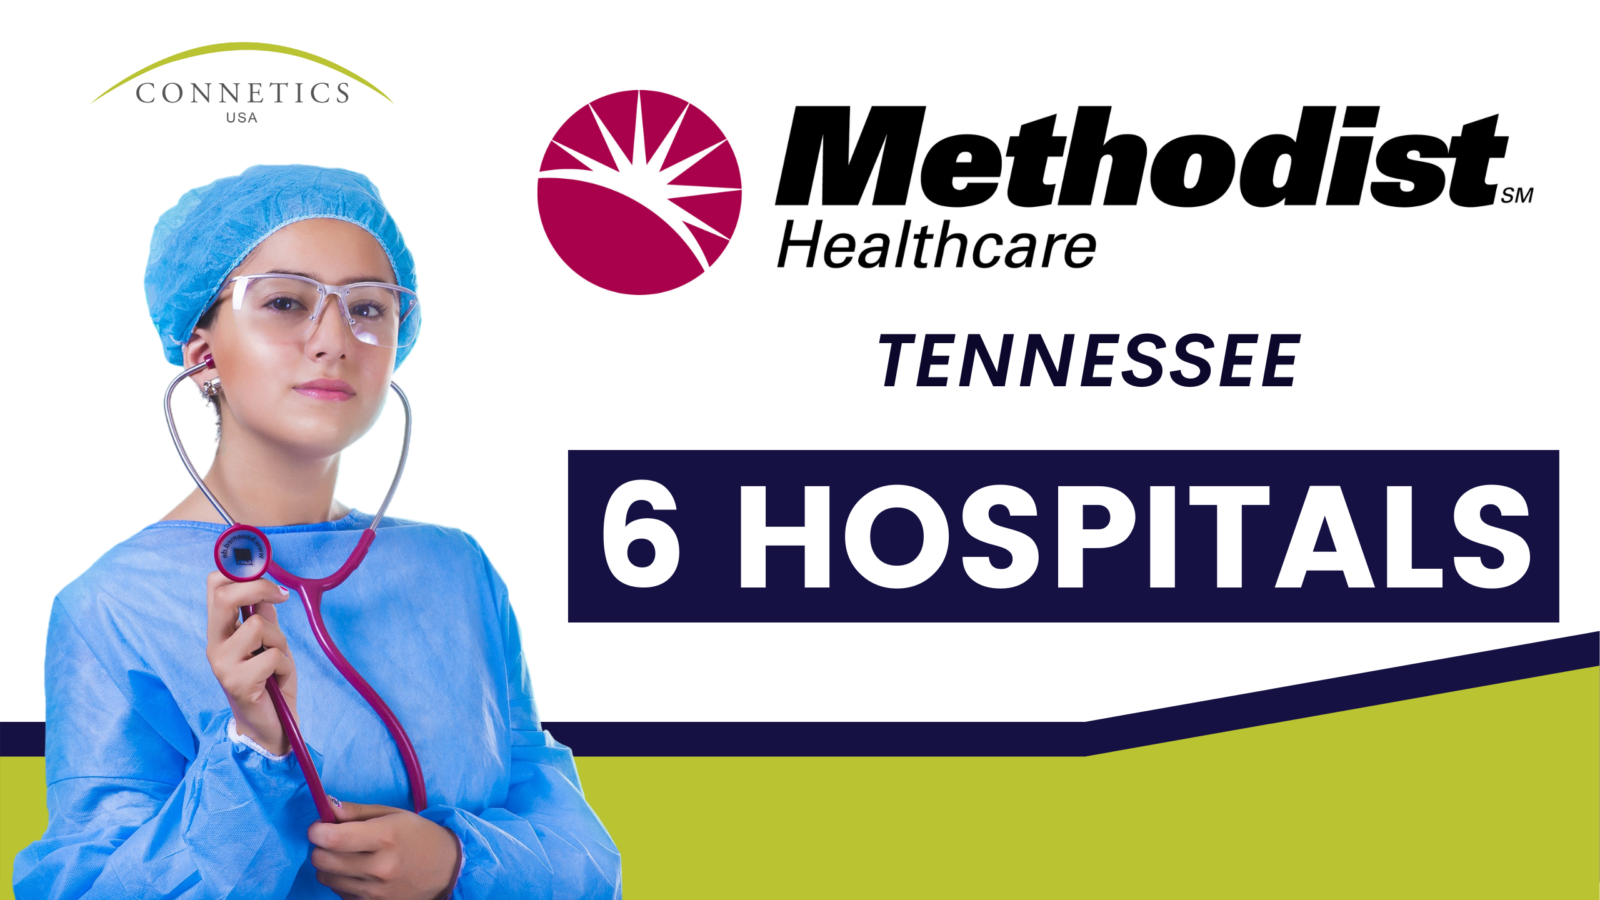 METHODIST HEALTHCARE HOSPITALS IN TENNESSEE